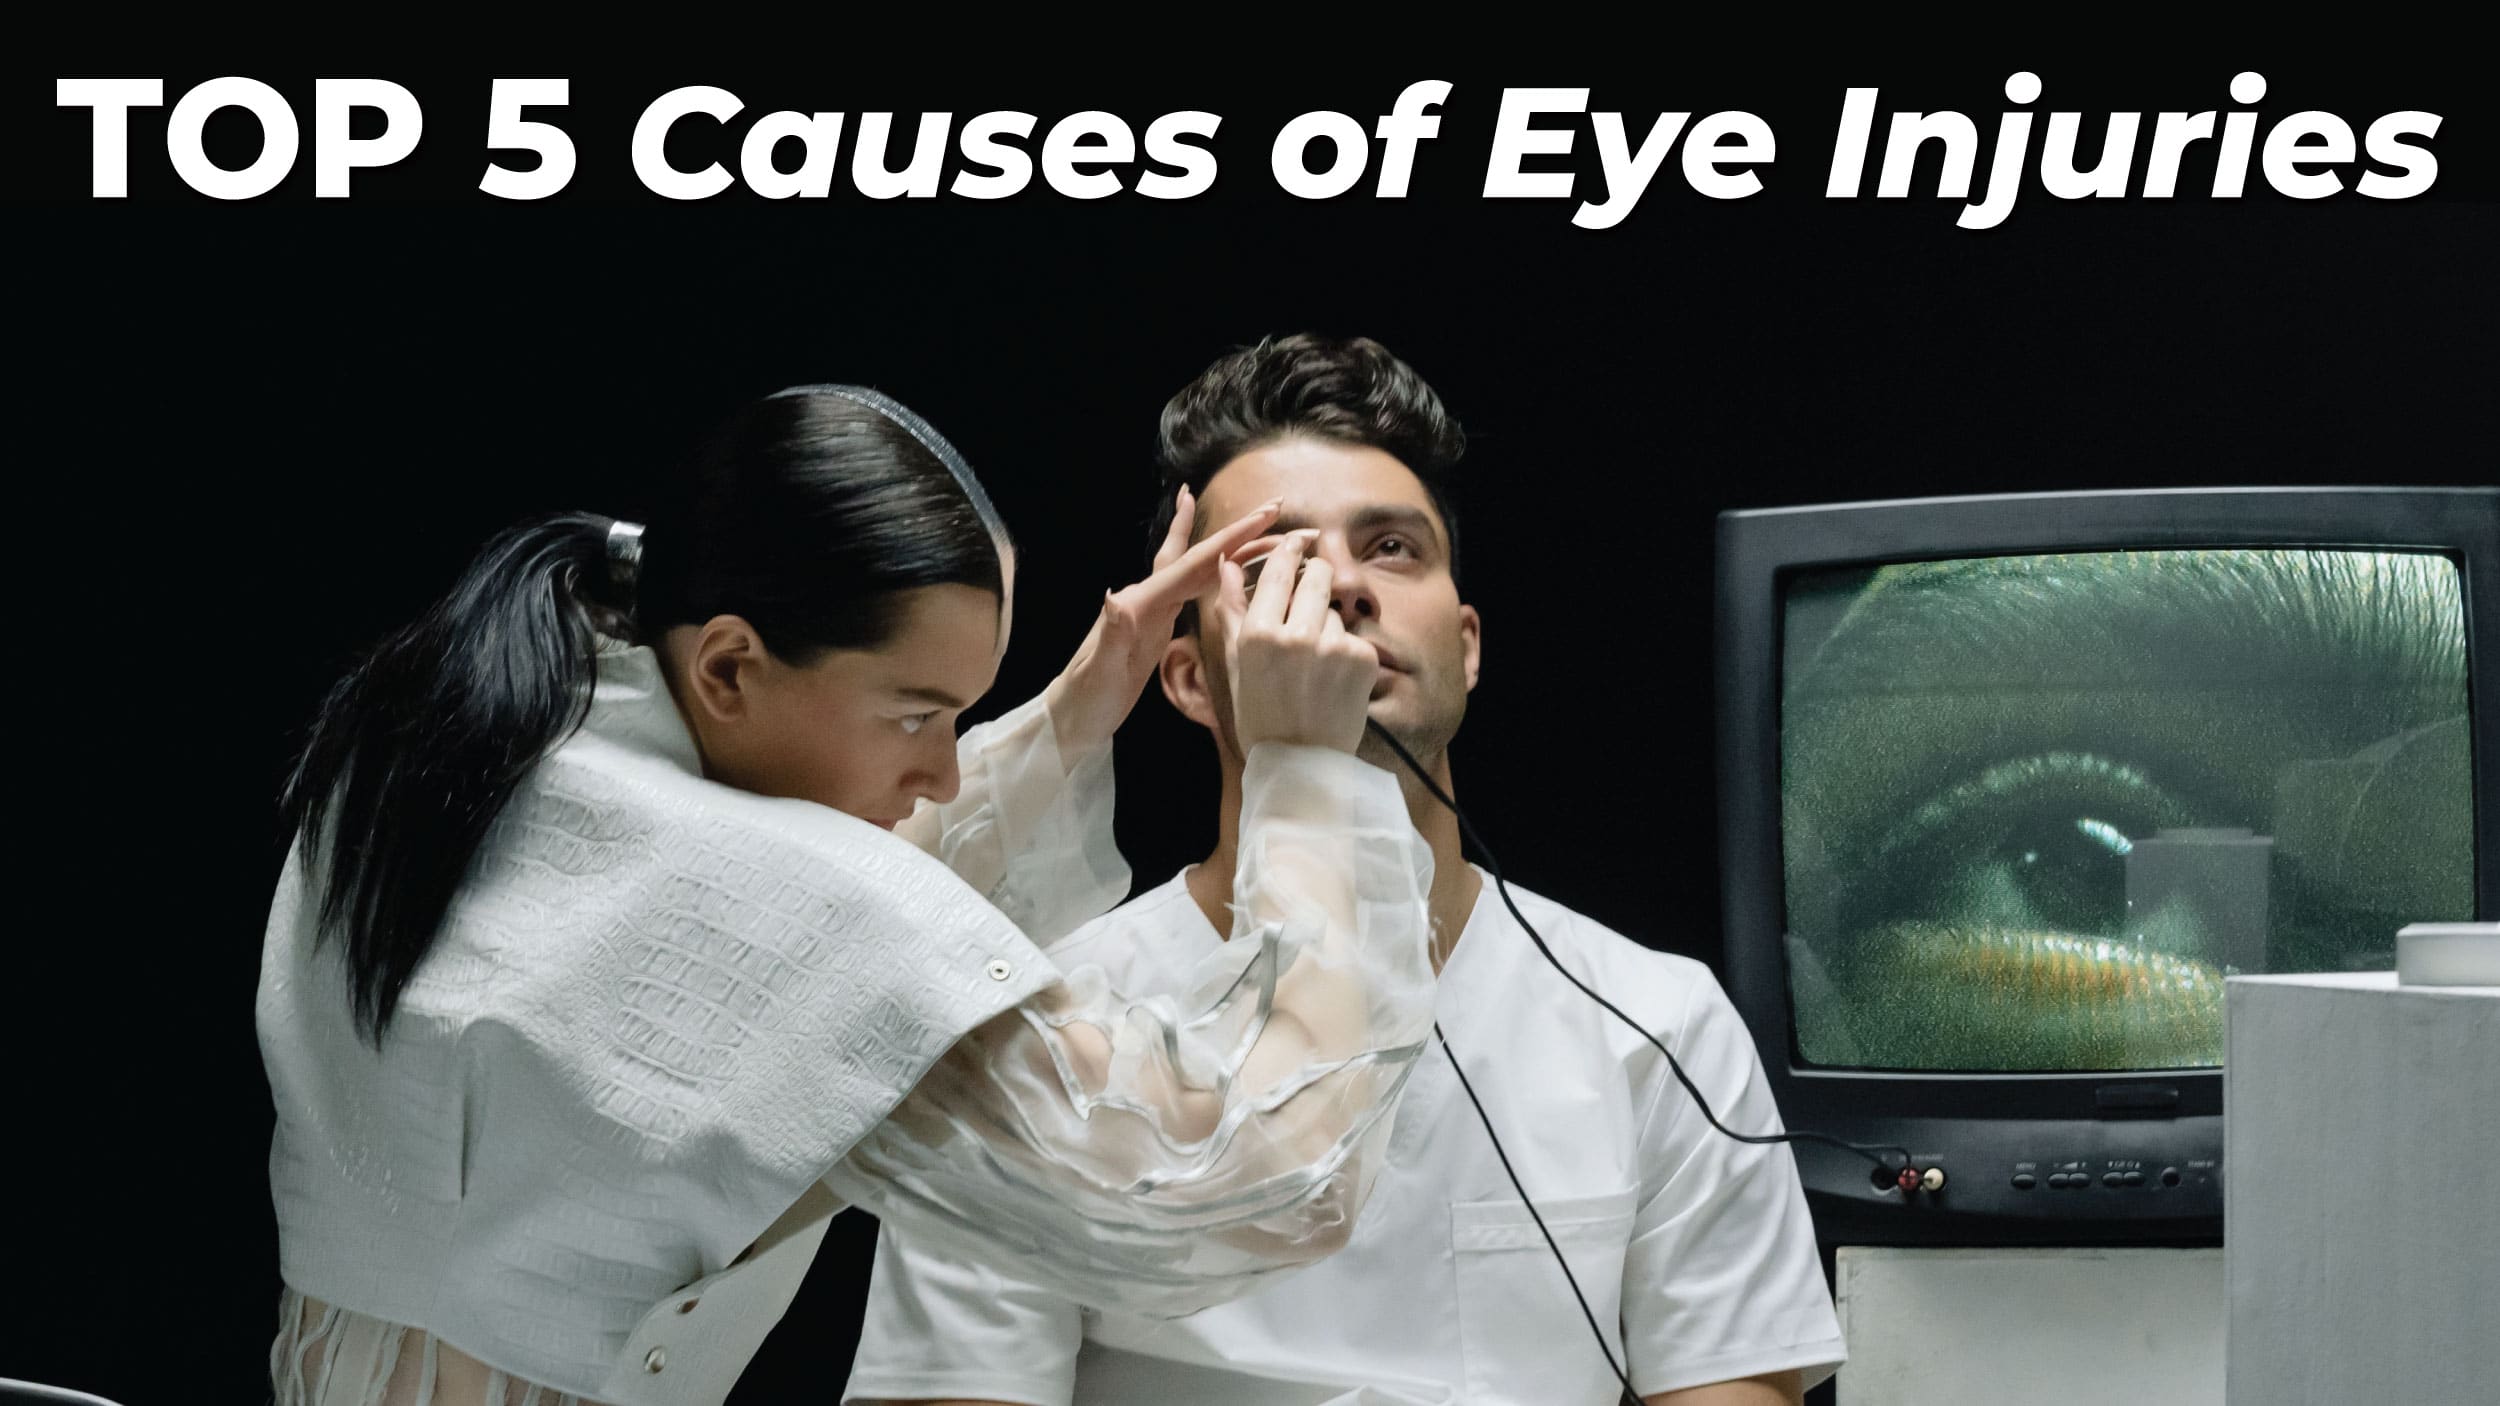 The Common Causes and Prevention of Eye Injuries Header